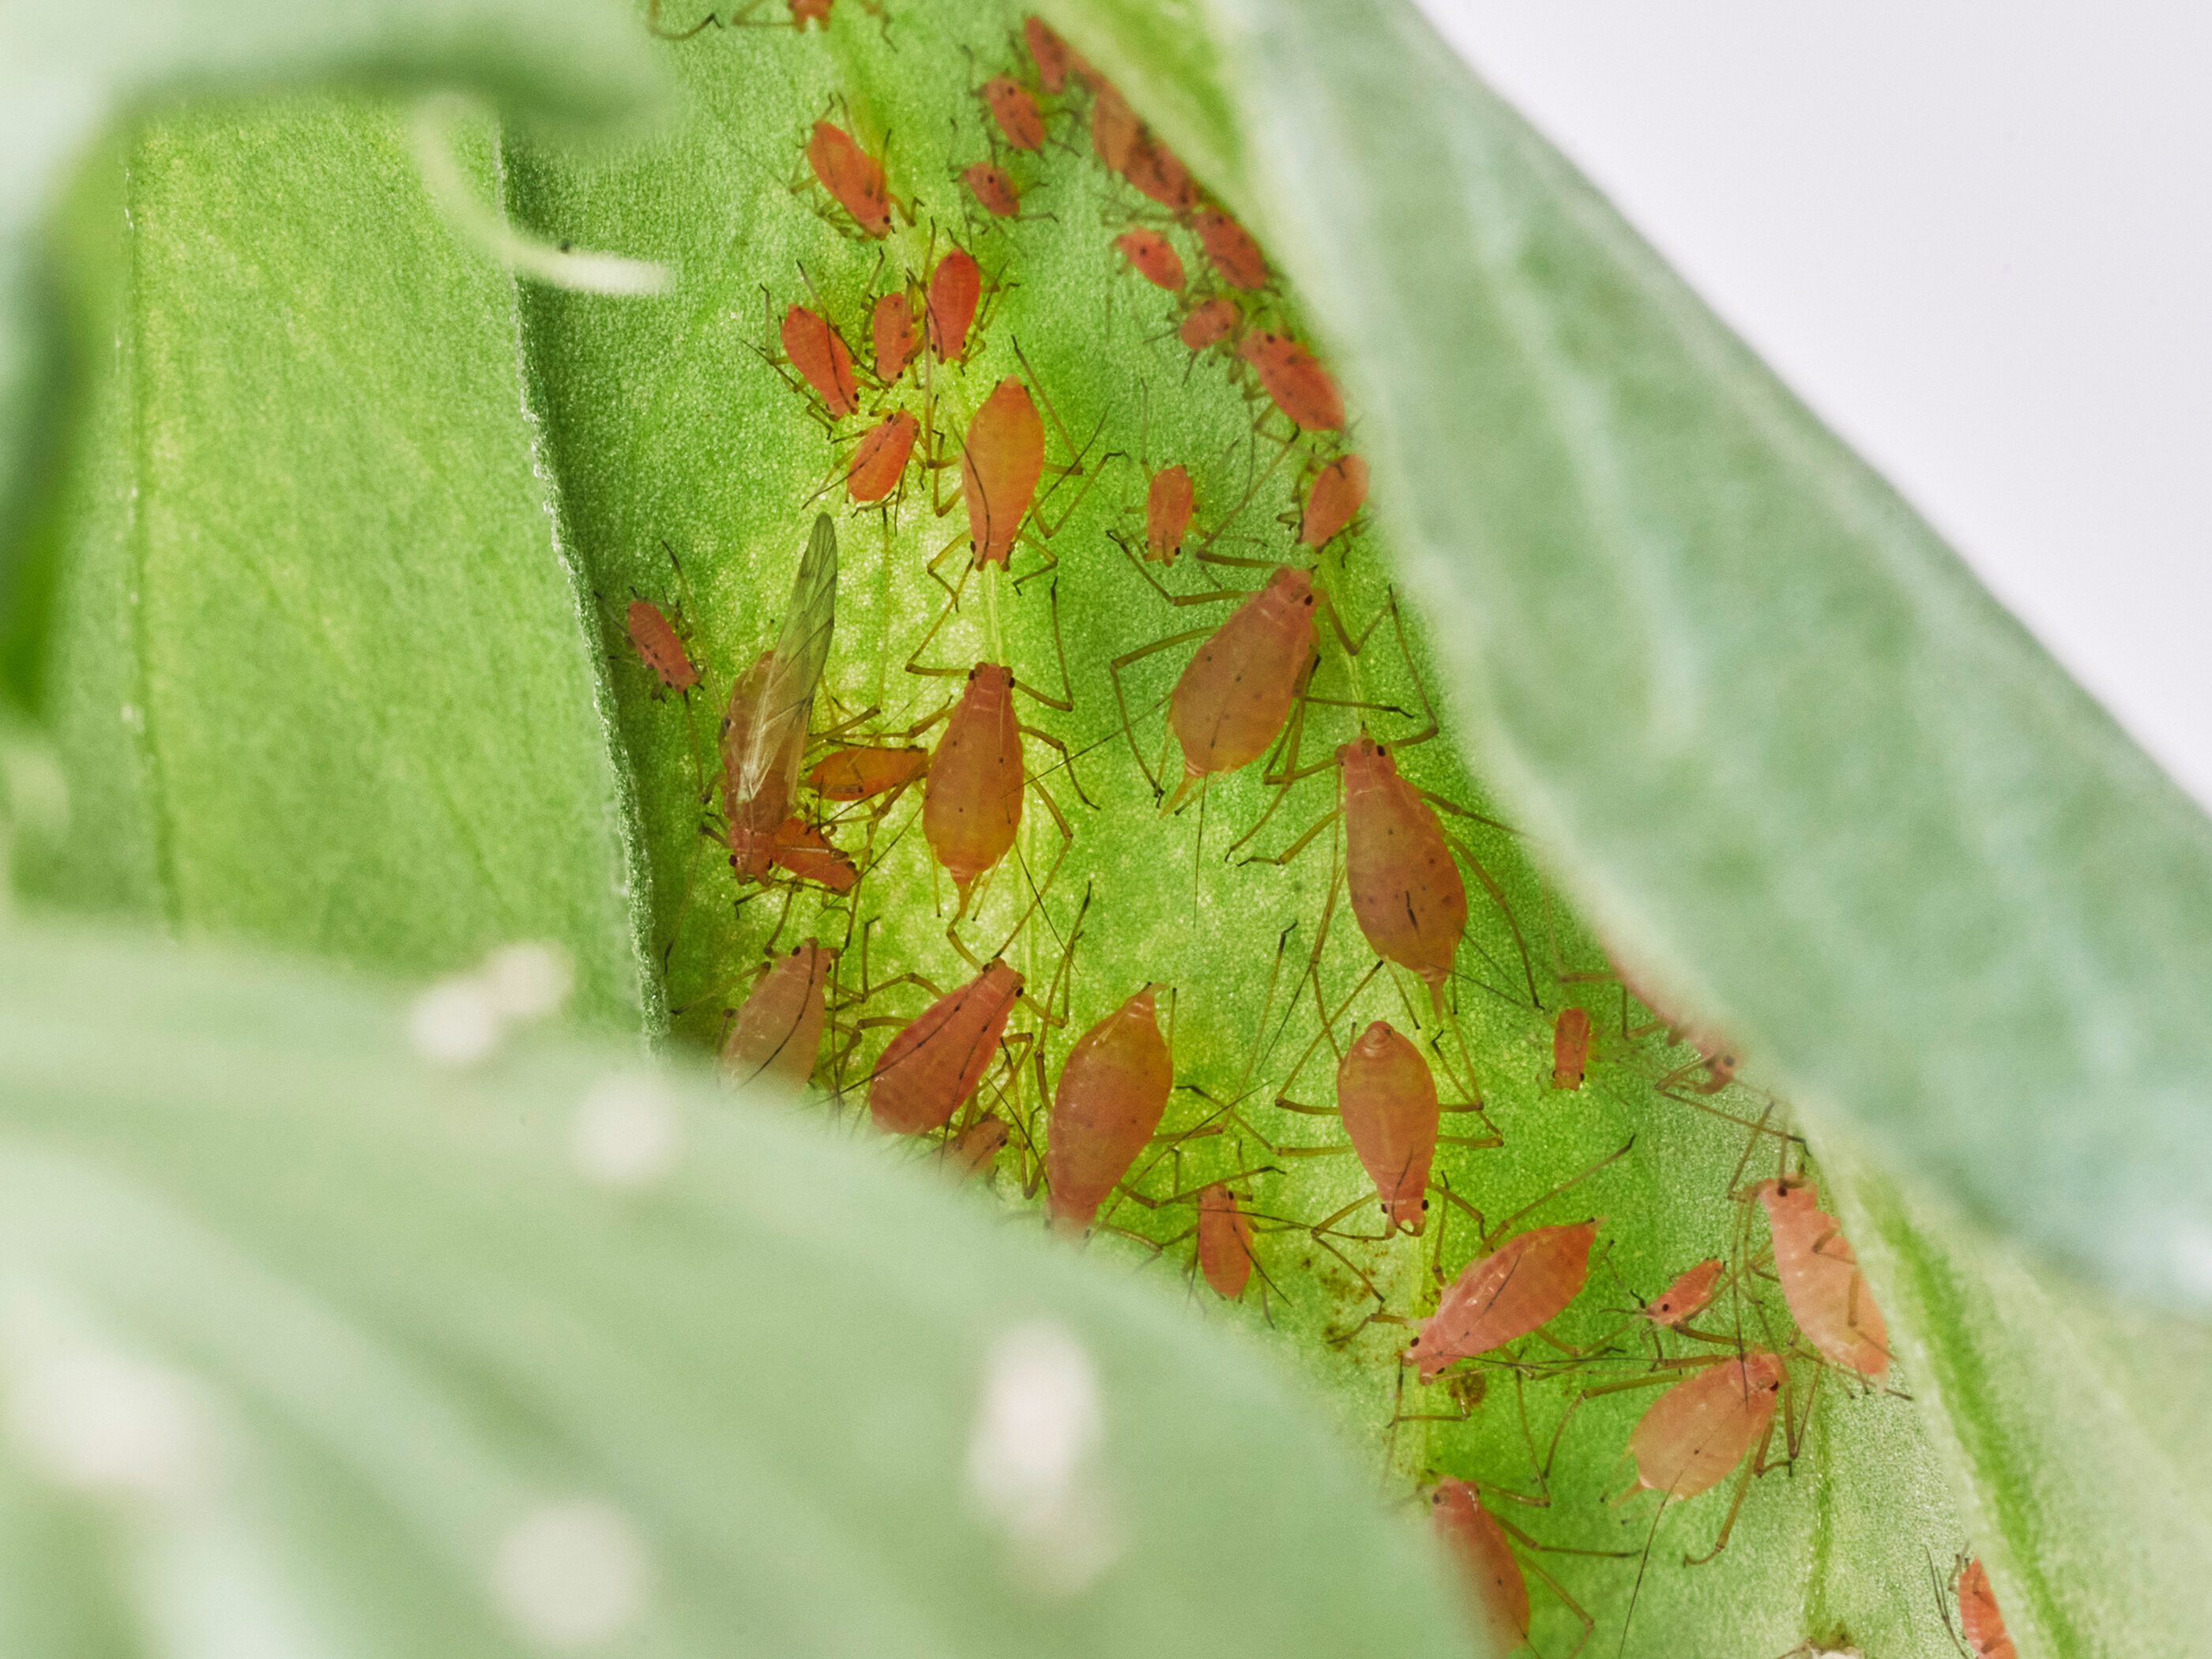 Catnip and pea aphids came up with different ways to make the same molecule